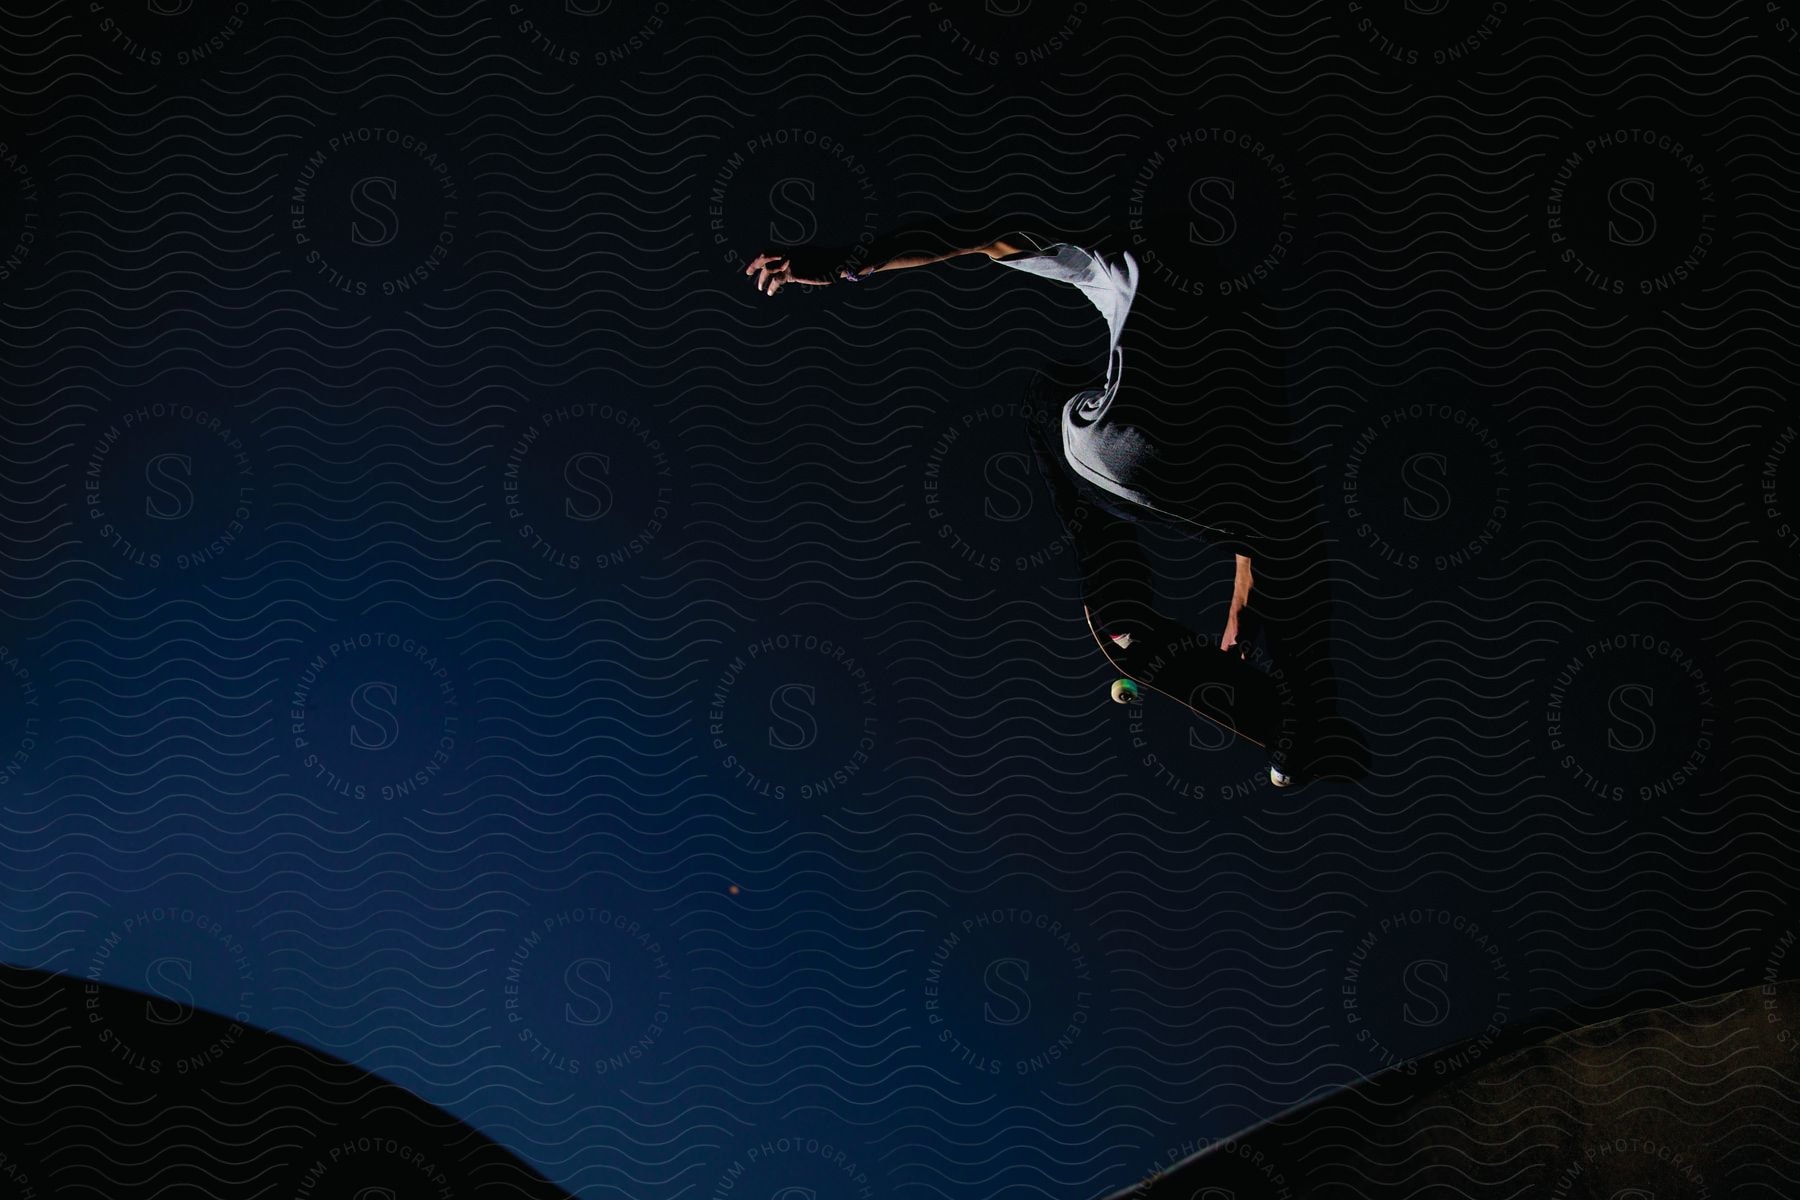 A man is seen performing a skateboard trick in midair after launching from a skate ramp at night